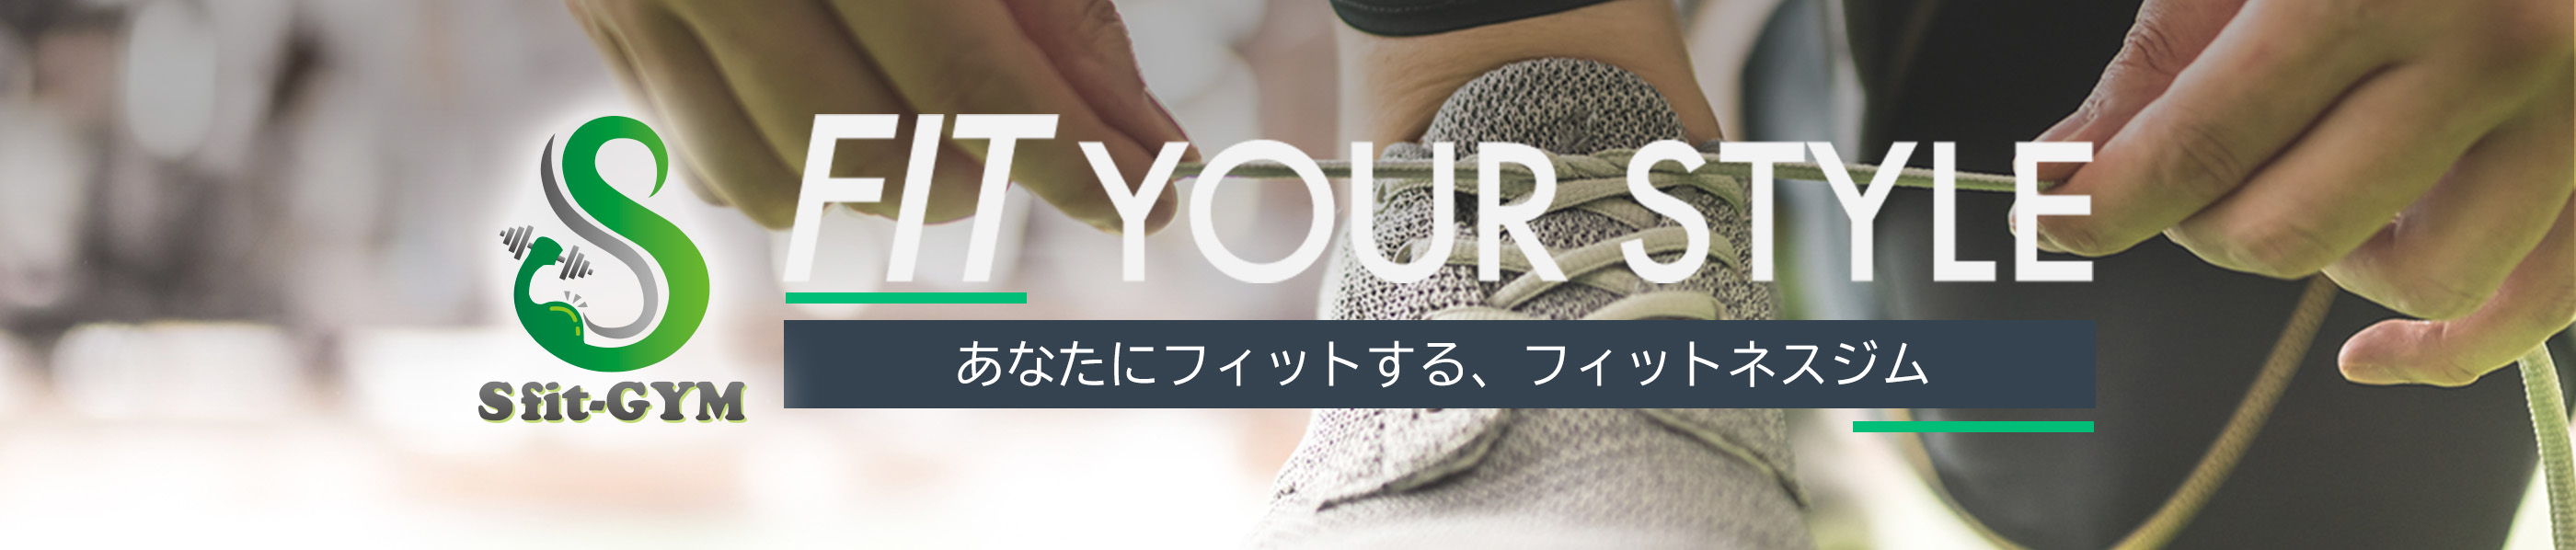 Sfit-GYM（エスフィットジム） / Fit your Style / あなたにフィットする、フィットネスジム